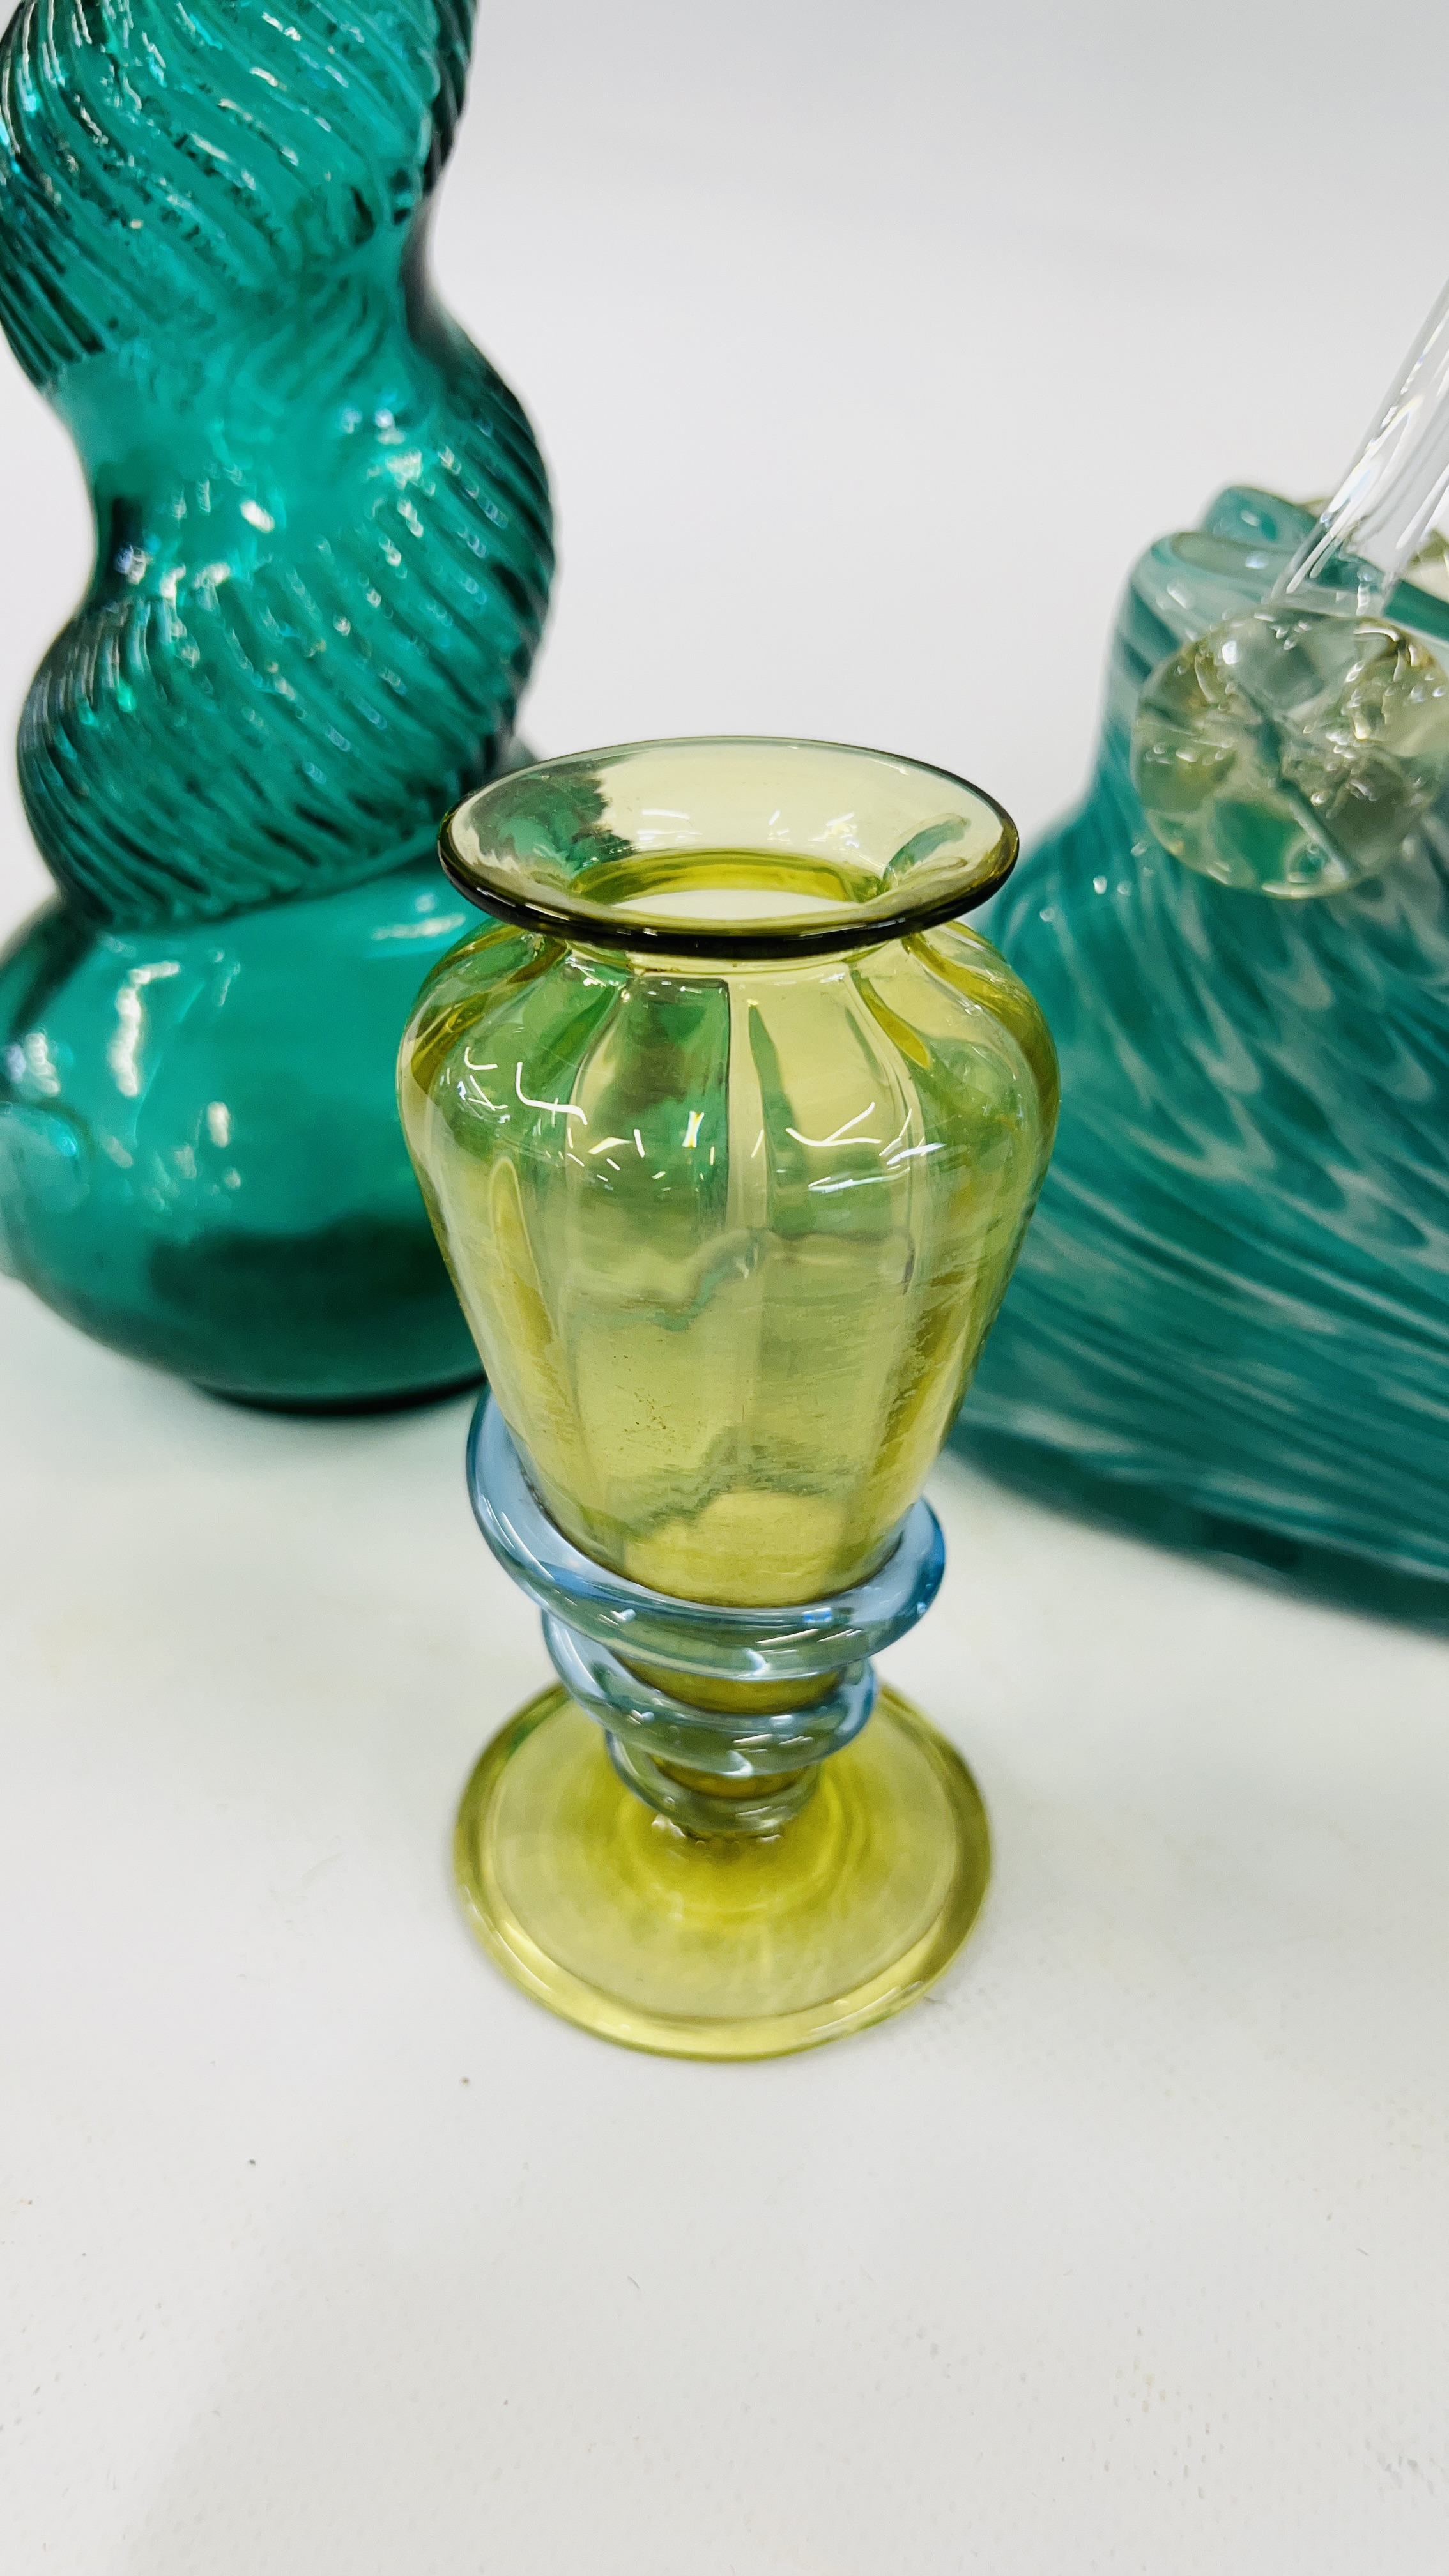 A VINTAGE GREEN GLASS BOTTLE MARKED "SHONFELDS" ALONG WITH AN ART GLASS BASKET AND A VICTORIAN - Image 3 of 7